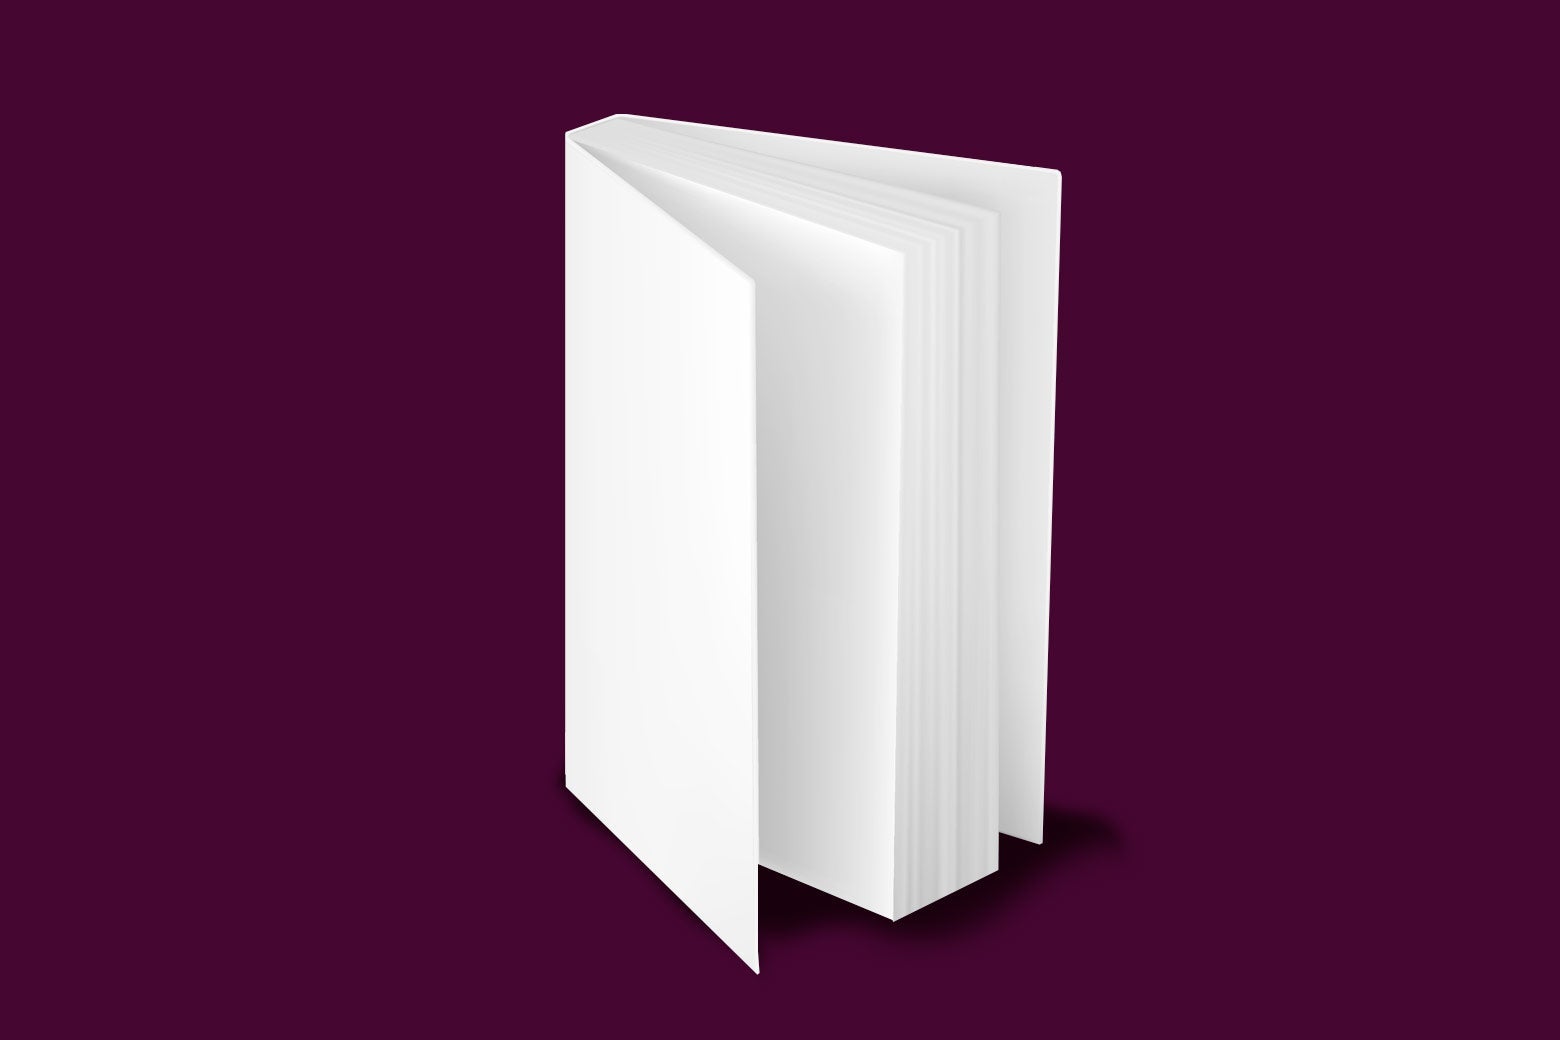 A totally blank book standing up slightly open